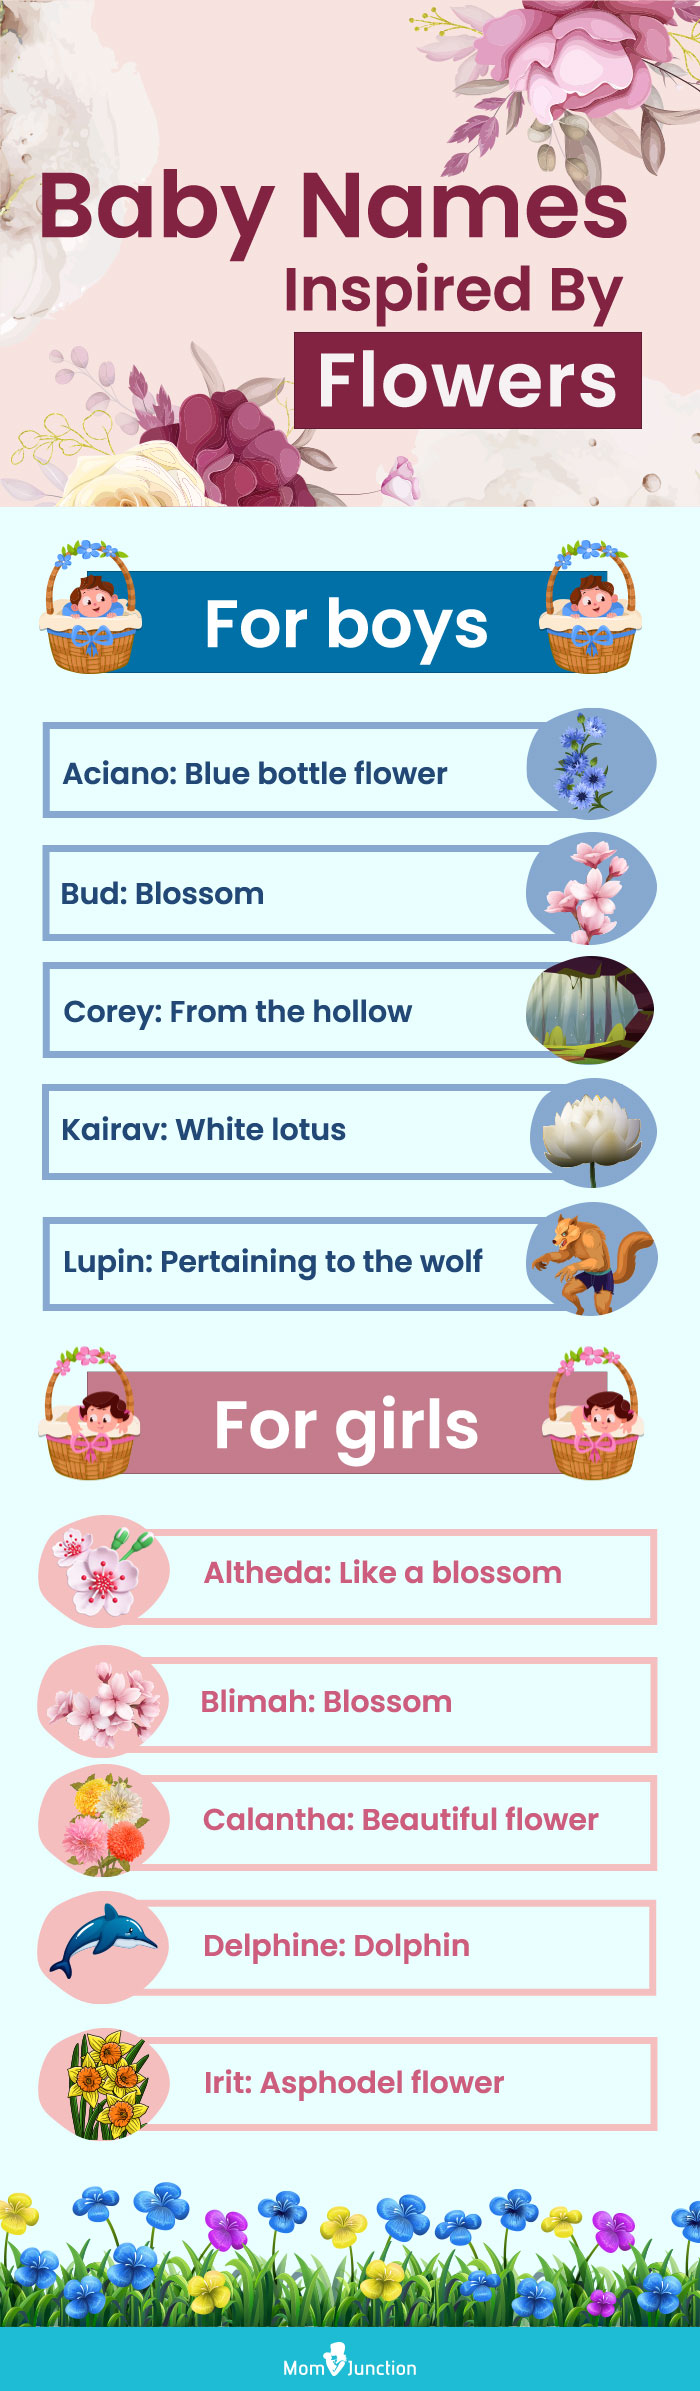 baby names inspired by flowers (infographic)